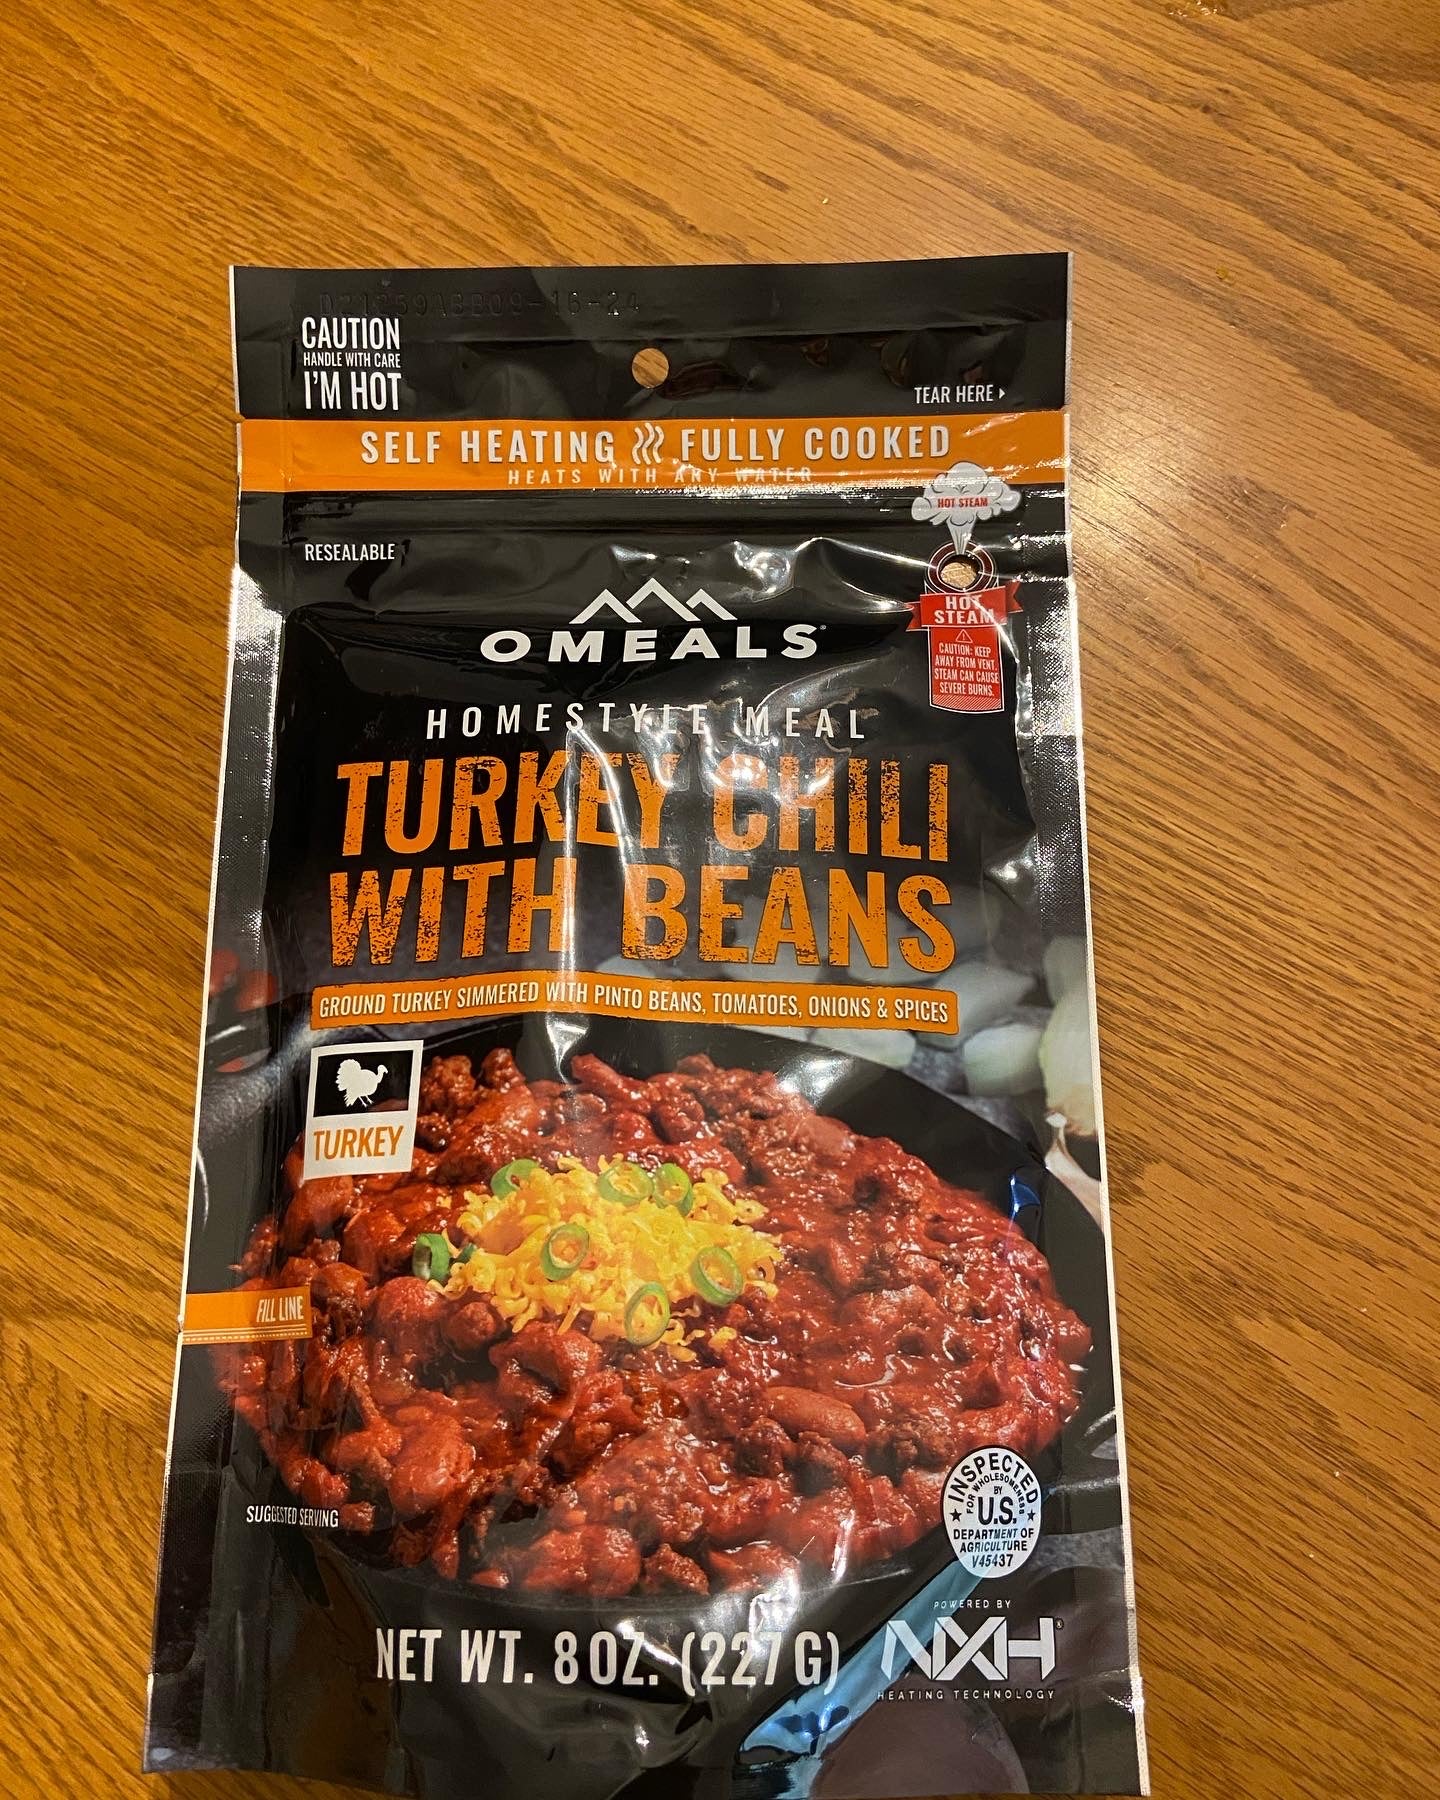 O'Meals, Turkey Chili with Beans